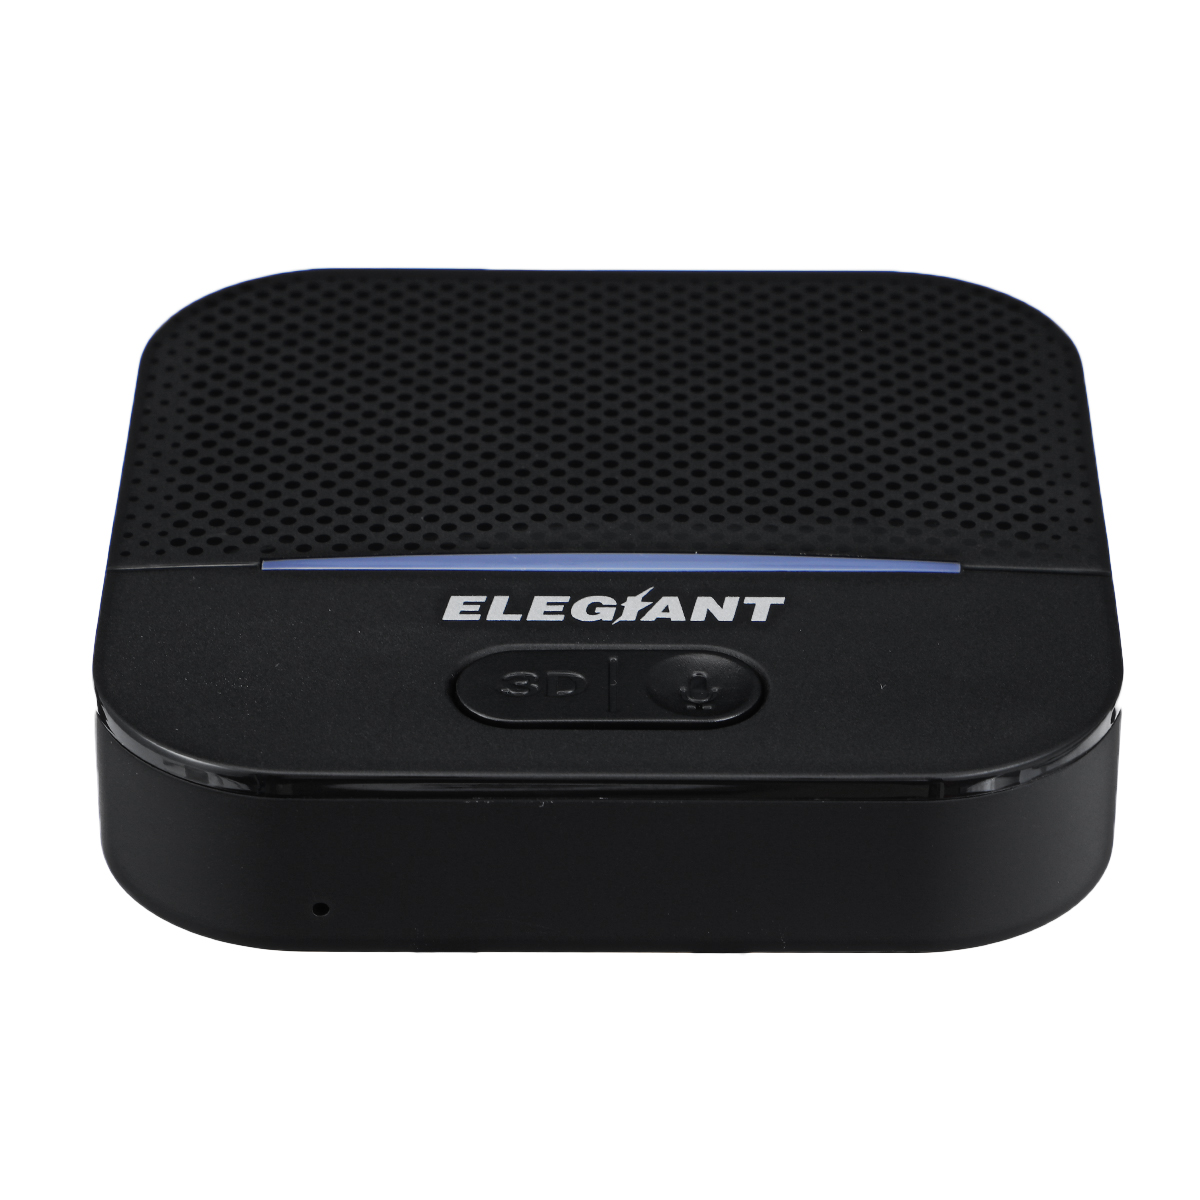 ELEGIANT BTI-036 bluetooth Receiver Wireless Audio Adapter Low Latency 3.5 mm RCA Audio Receiver Built-in Microphone